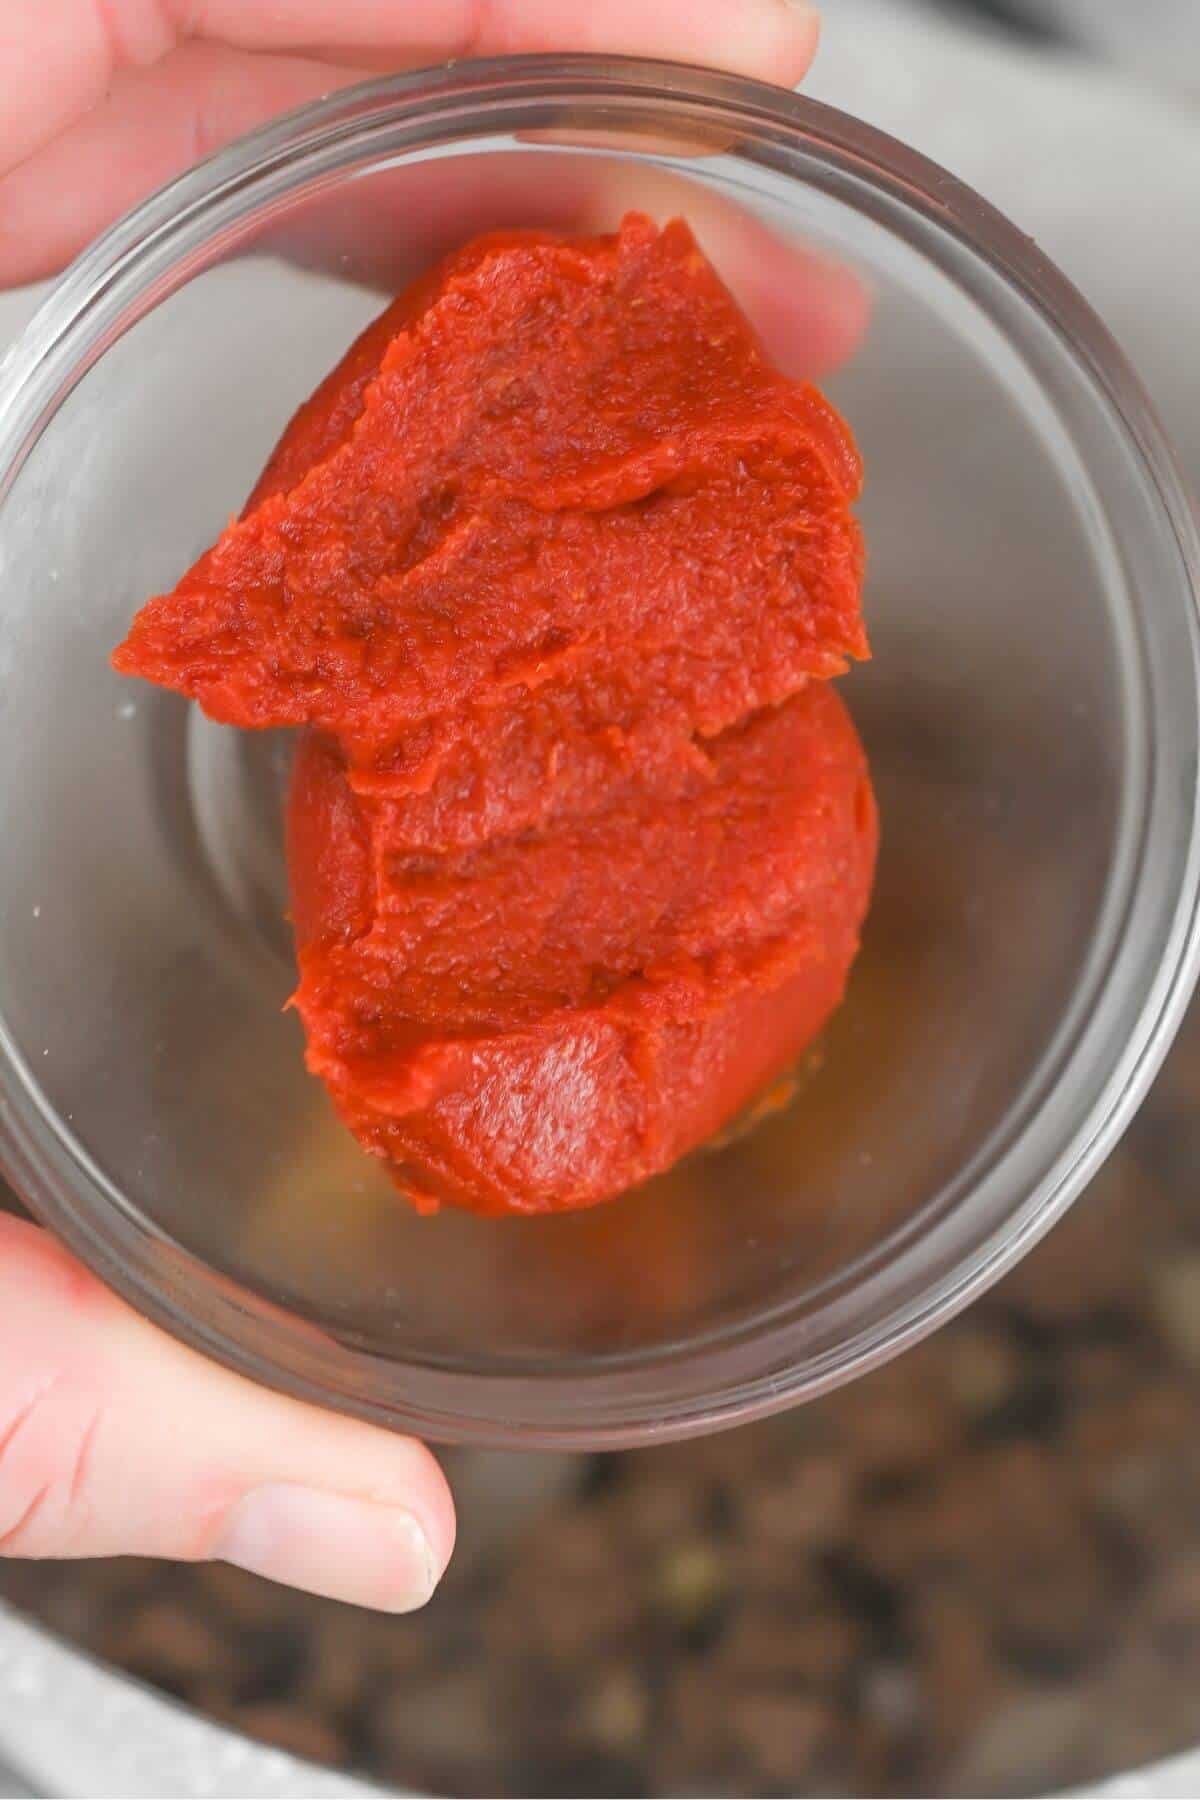 A person holding a bowl of red tomato paste over browned ground beef.